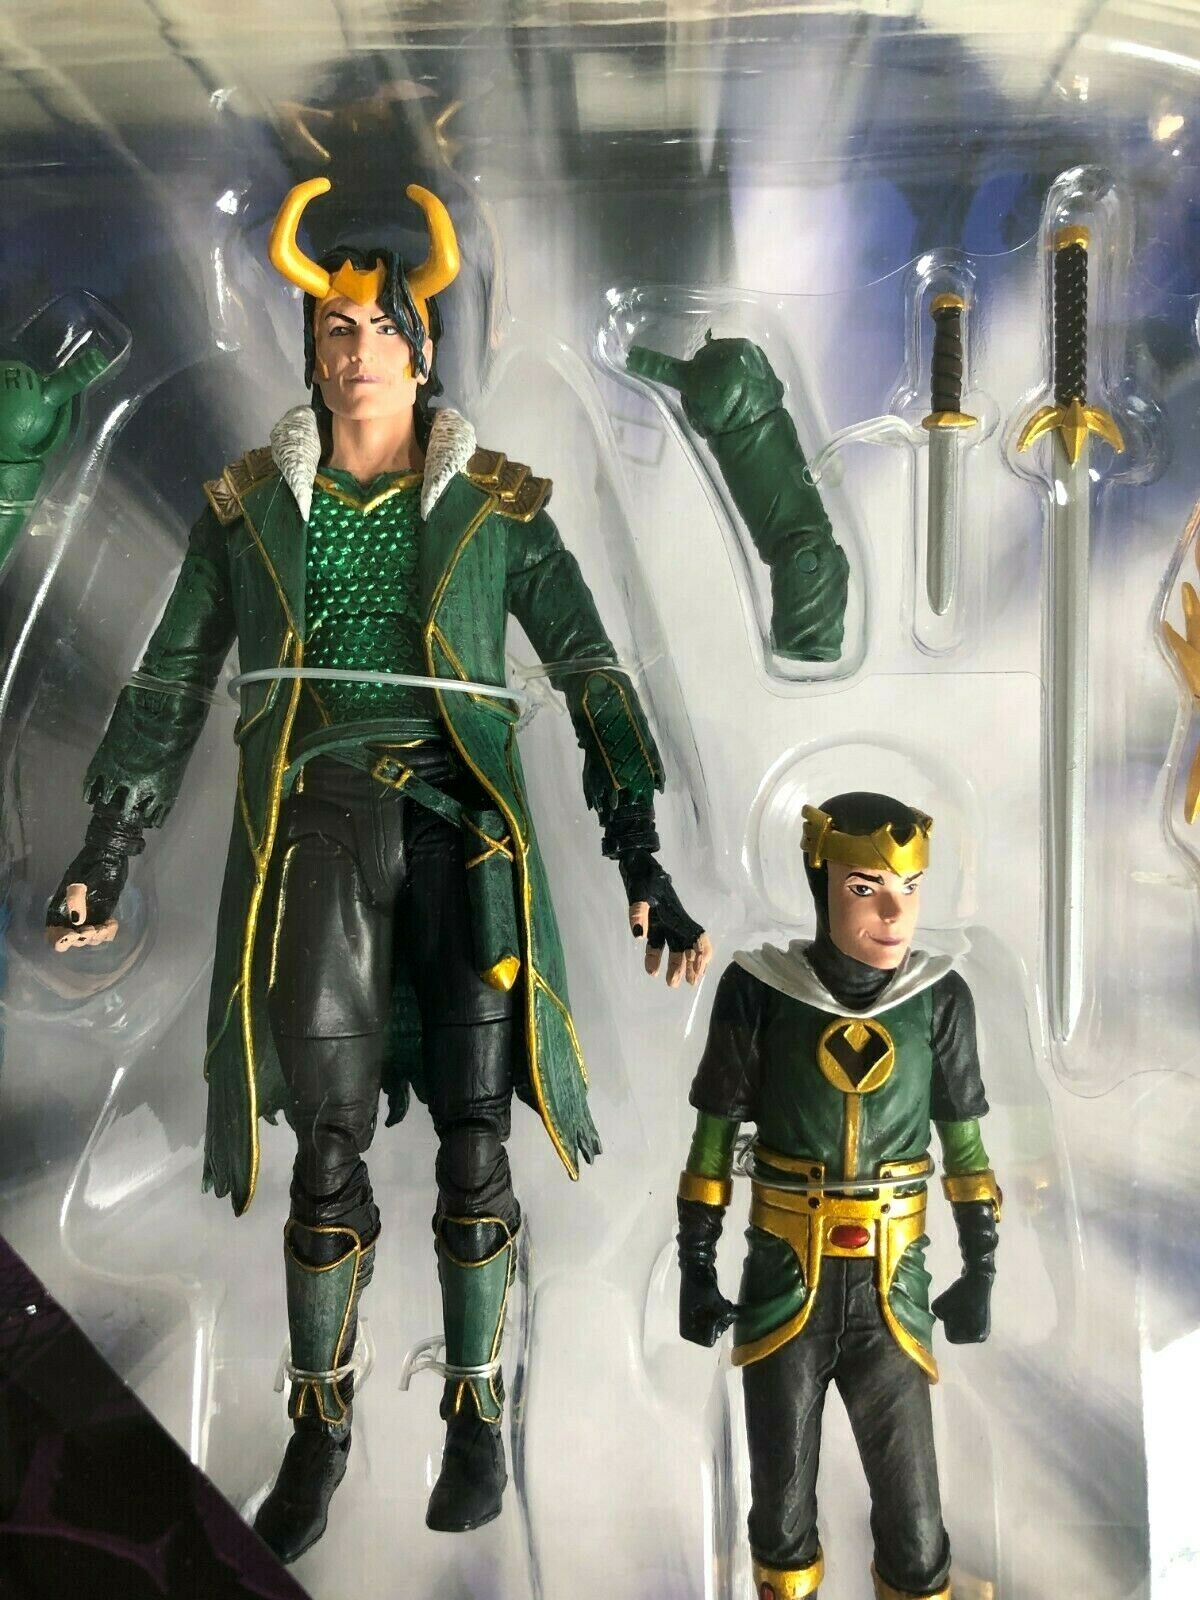 Marvel Select - LOKI - 2 figurines - Special Collector Edition